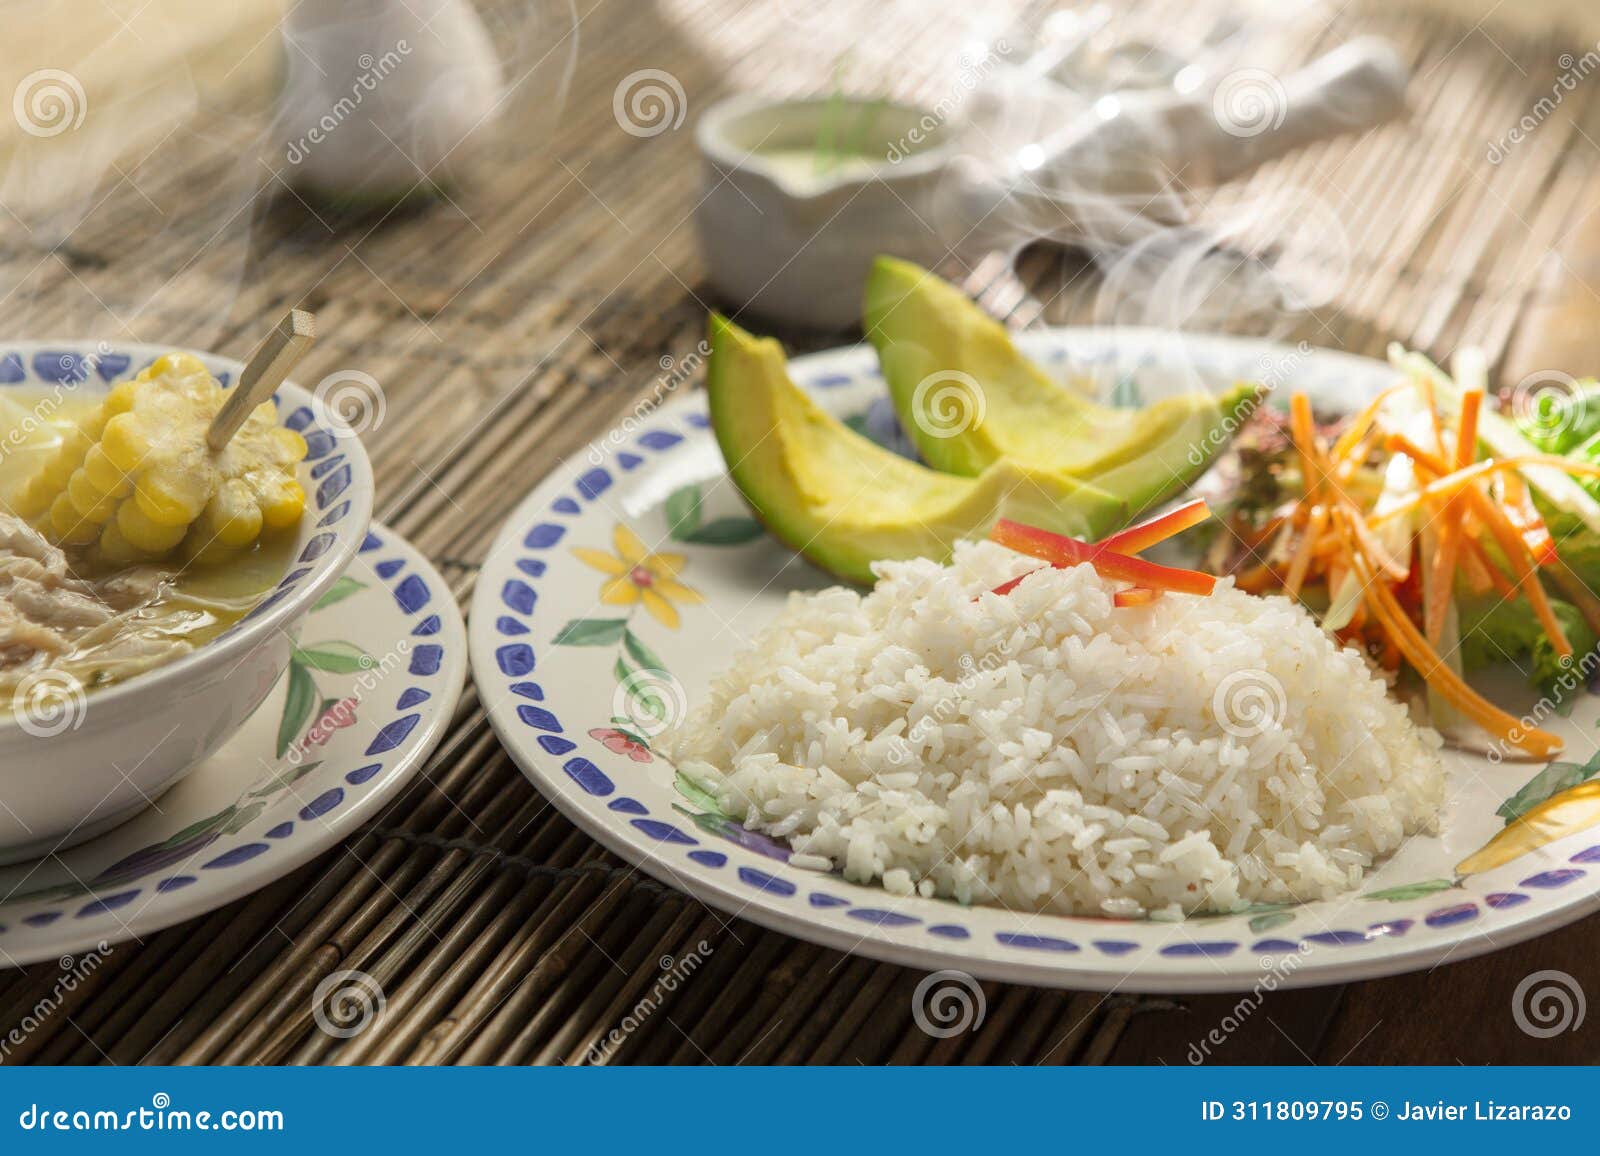 ajiaco traditional colombian dish typical of bogotÃ¡